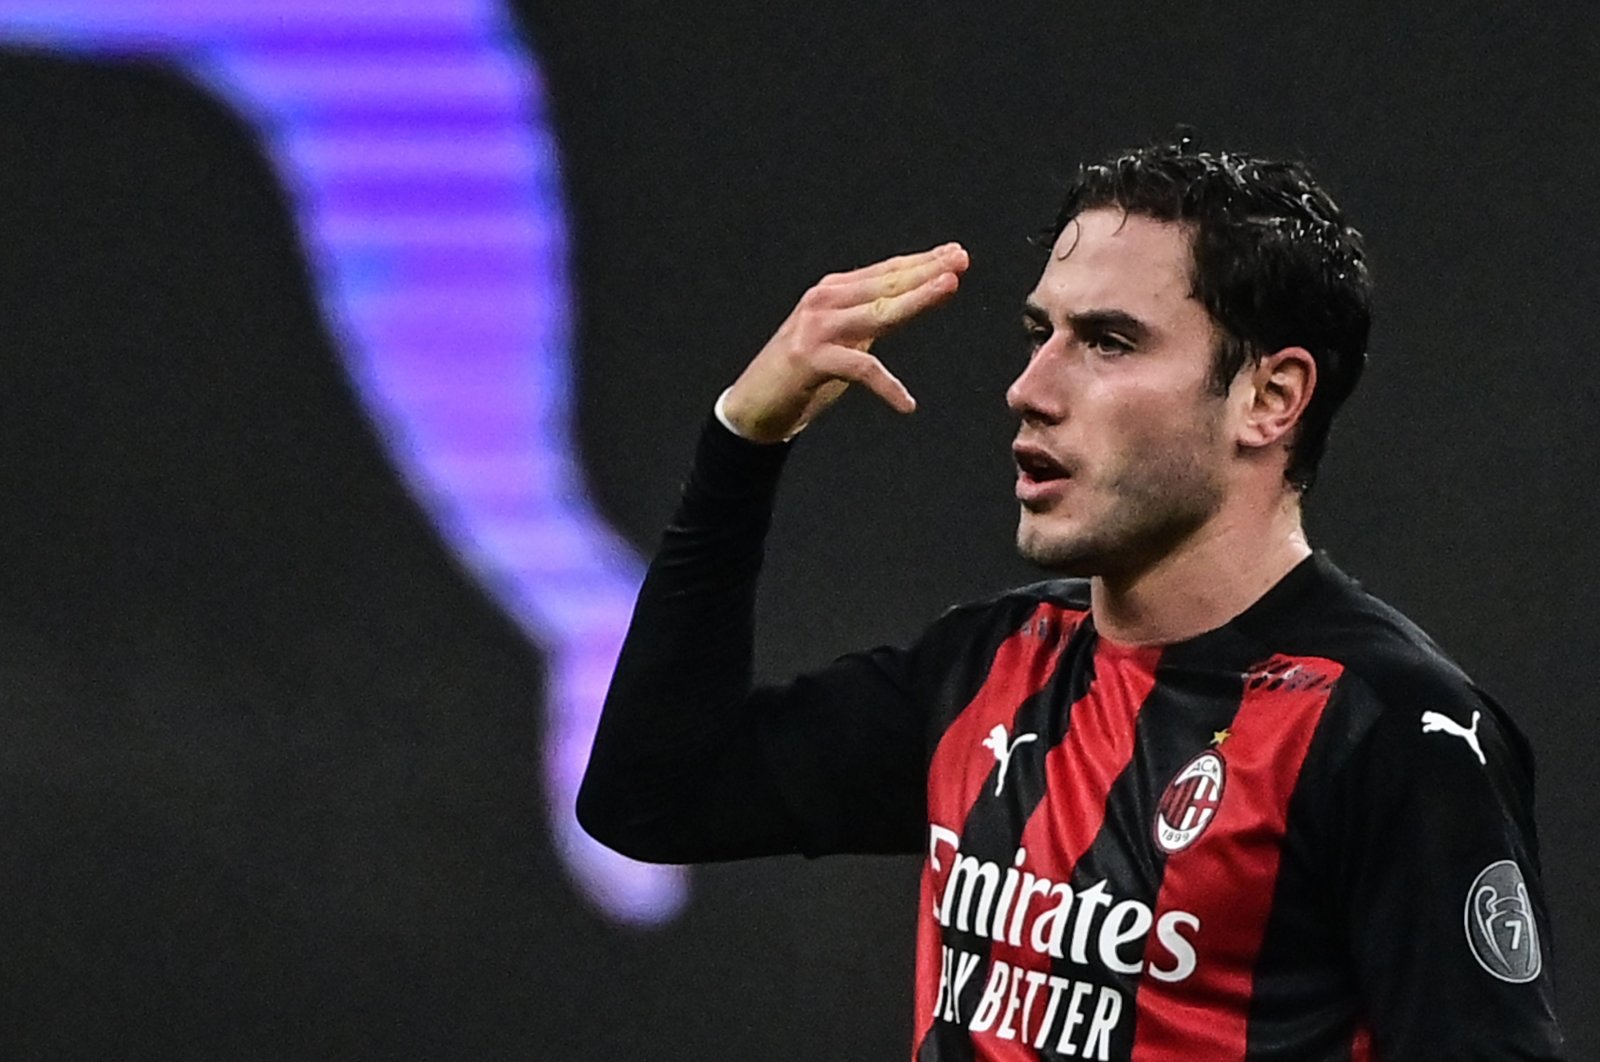 AC Milan's Davide Calabria celebrates a goal during a Serie A match against Juventus at the Giuseppe Meazza stadium, in Milan, Italy, Jan. 6, 2021. (AFP Photo)